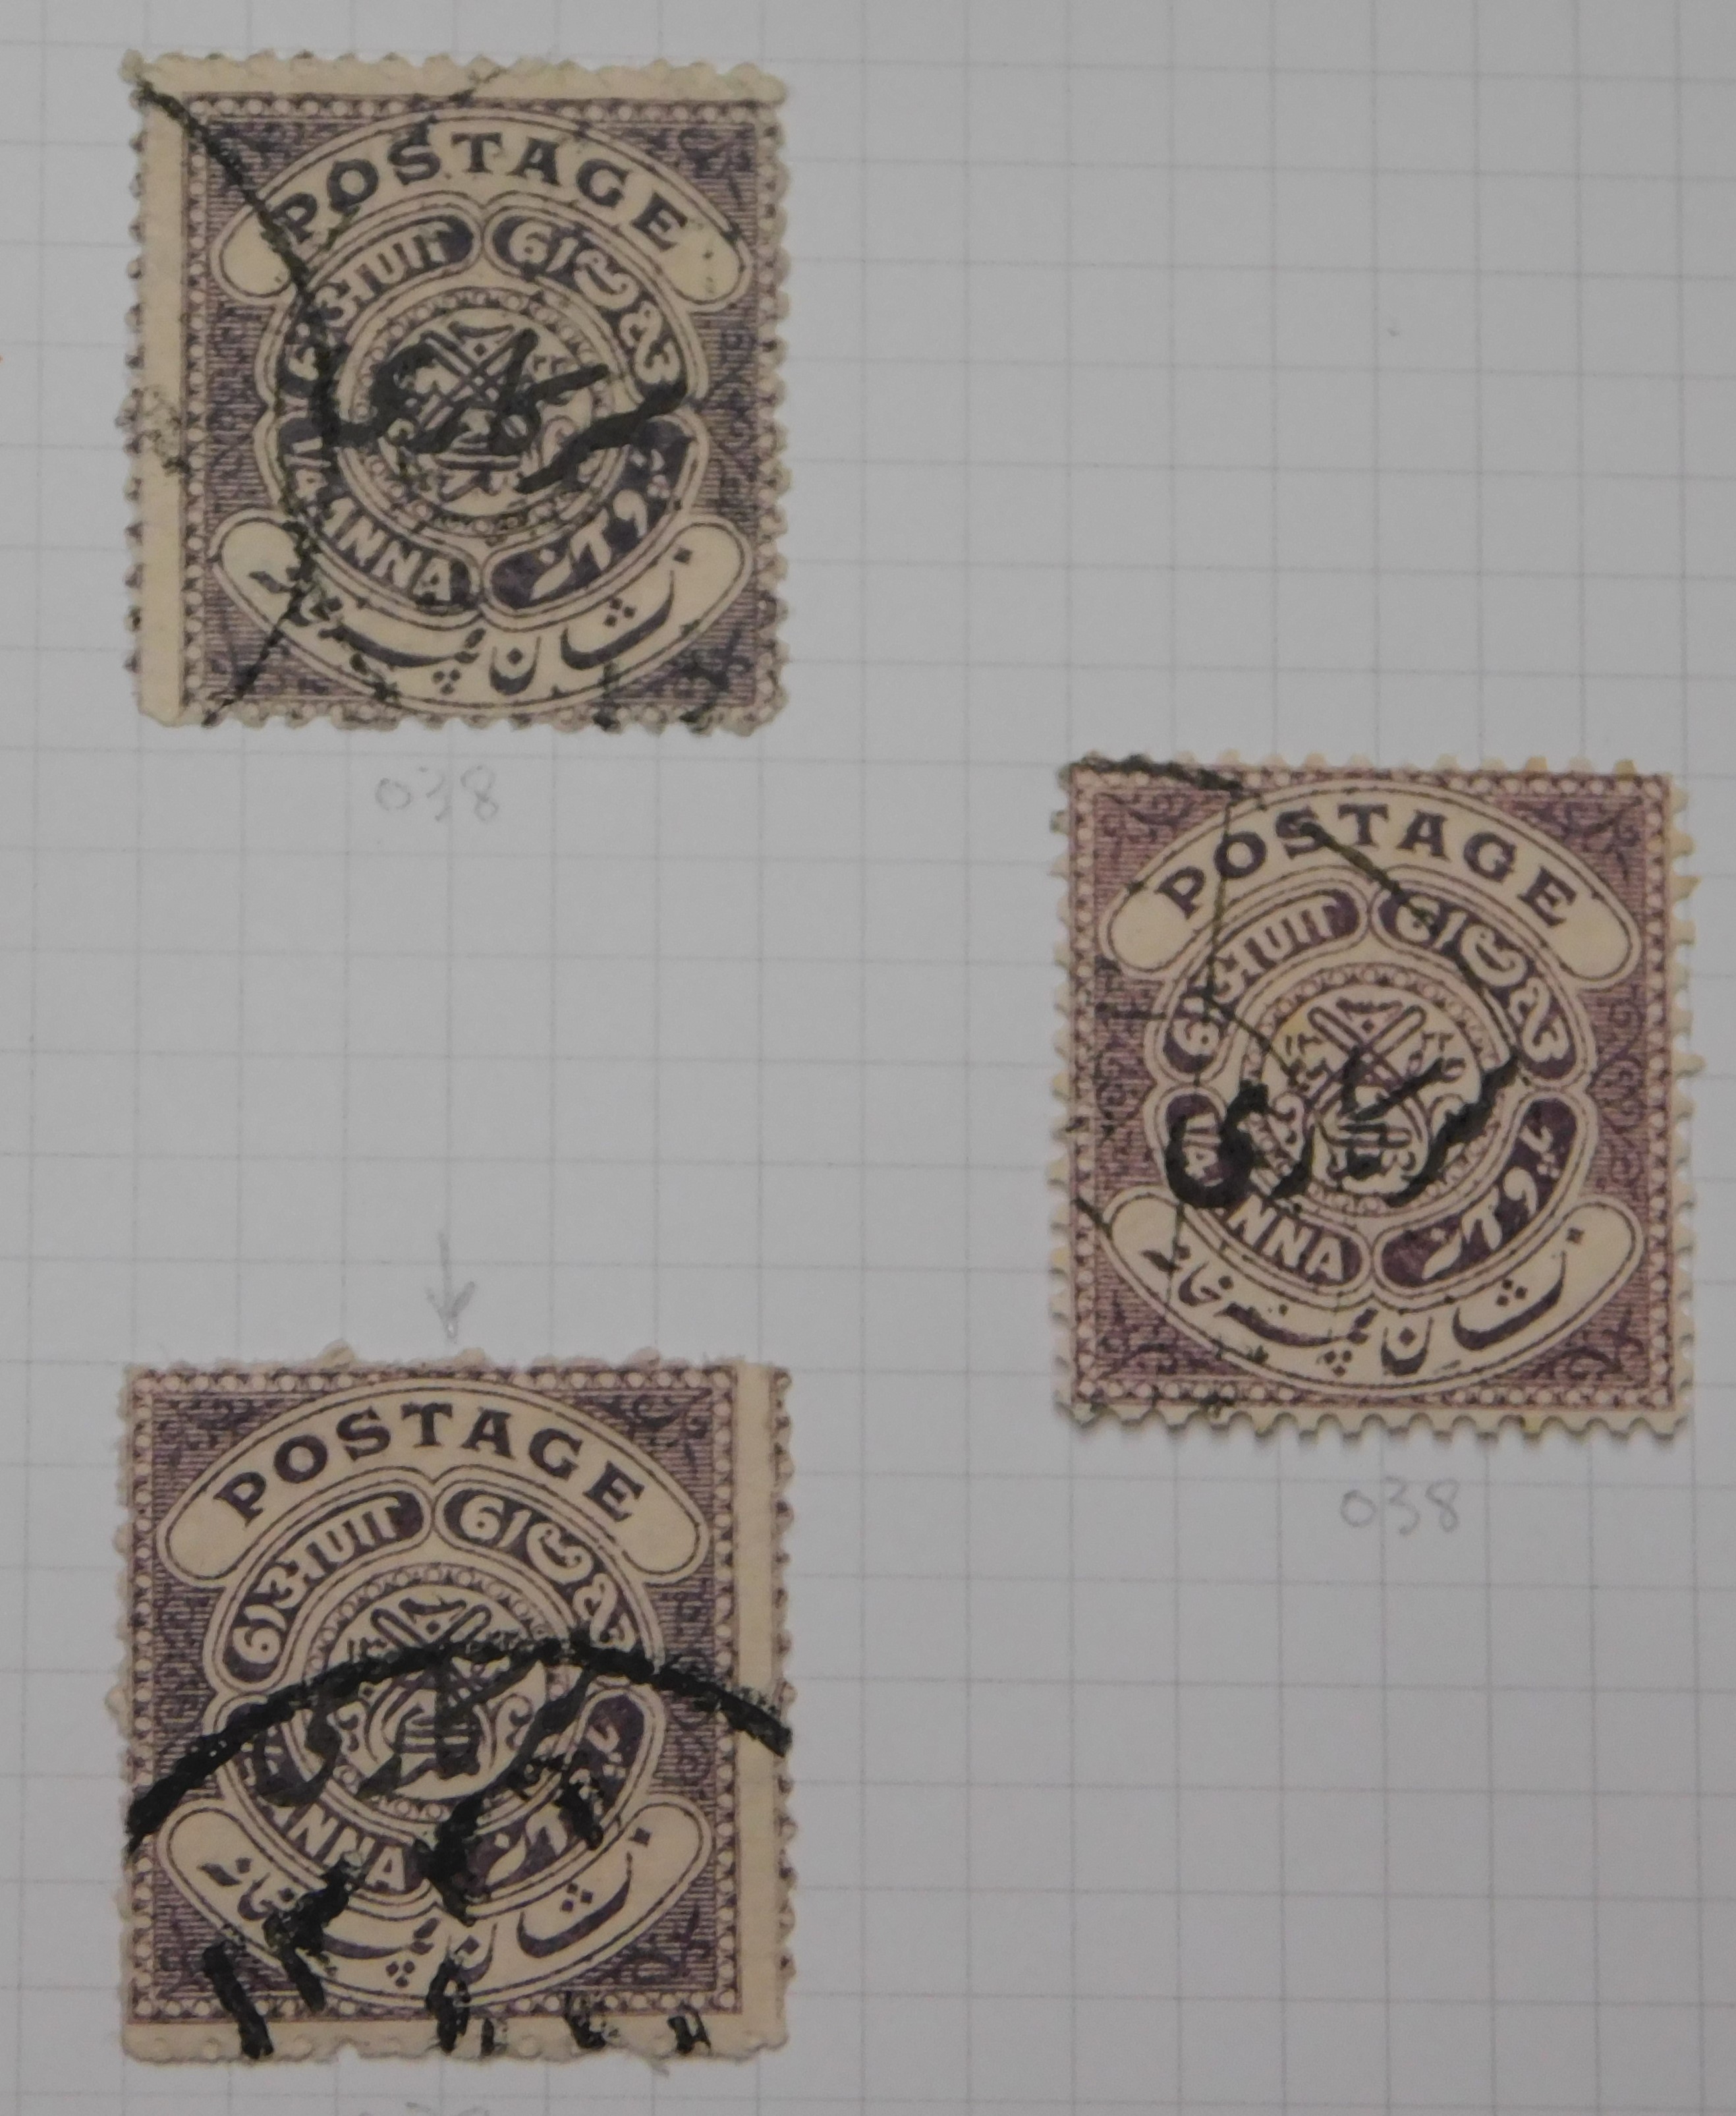 India (Hyderabad) Officials very fine used 1911-1912 035 to 039c, 038 P12.1/2 (Not catalogues) al 20 - Image 4 of 7